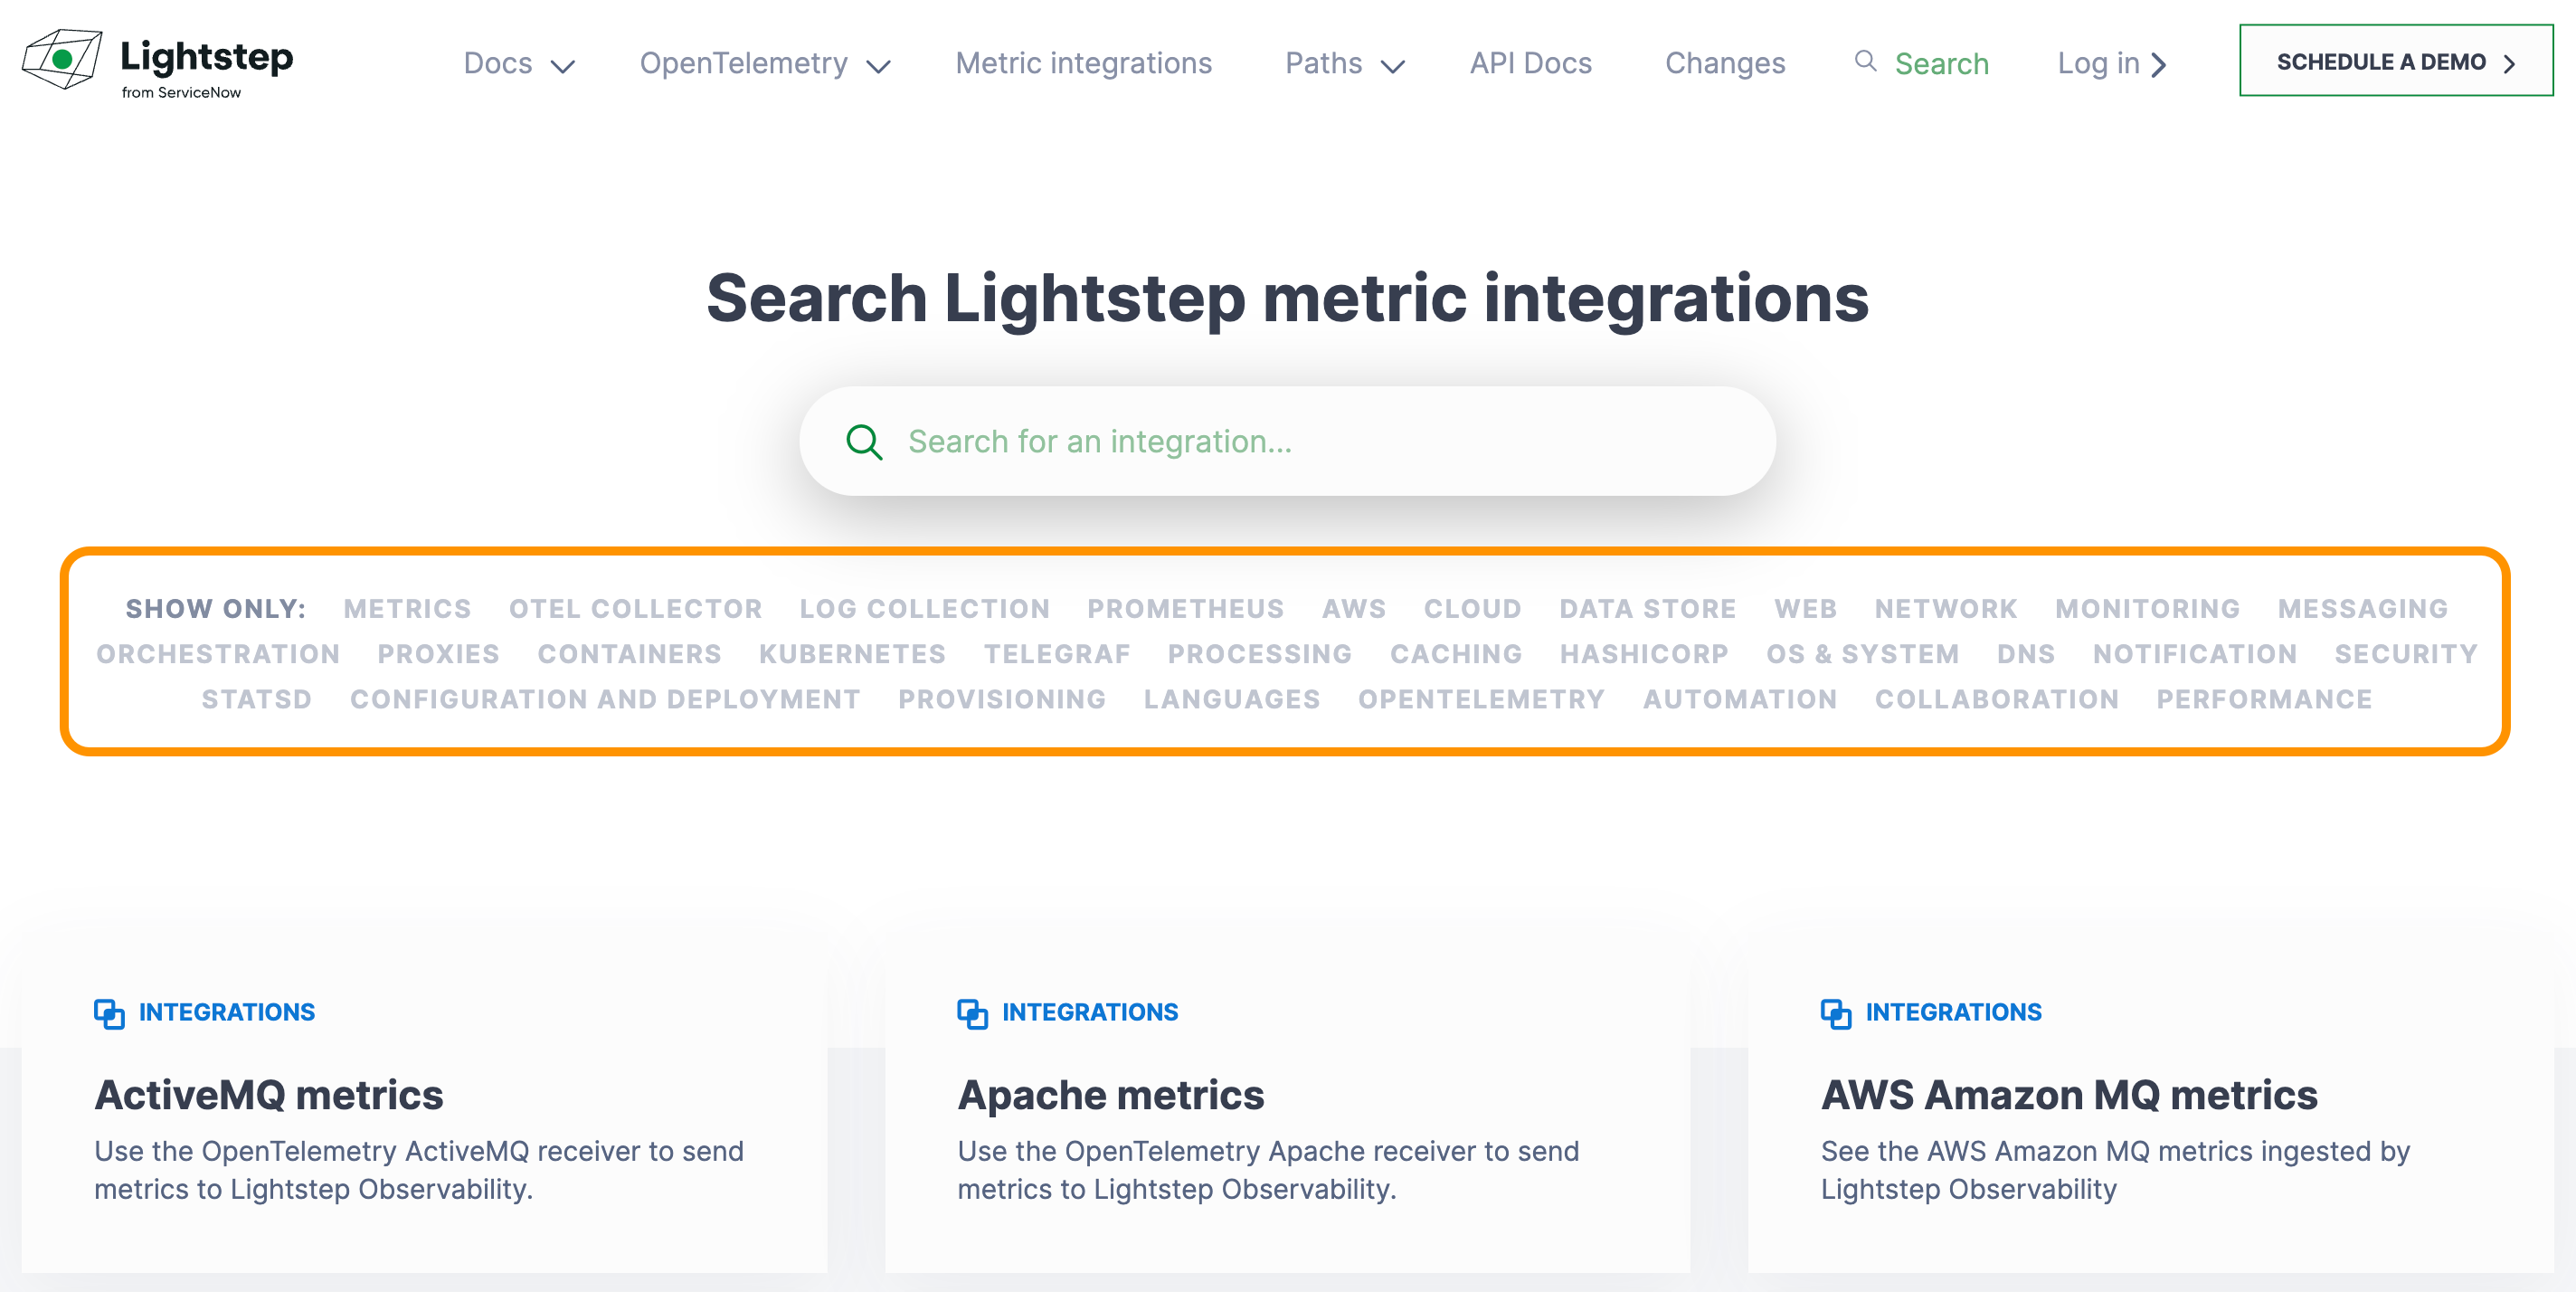 Use filters to find integrations